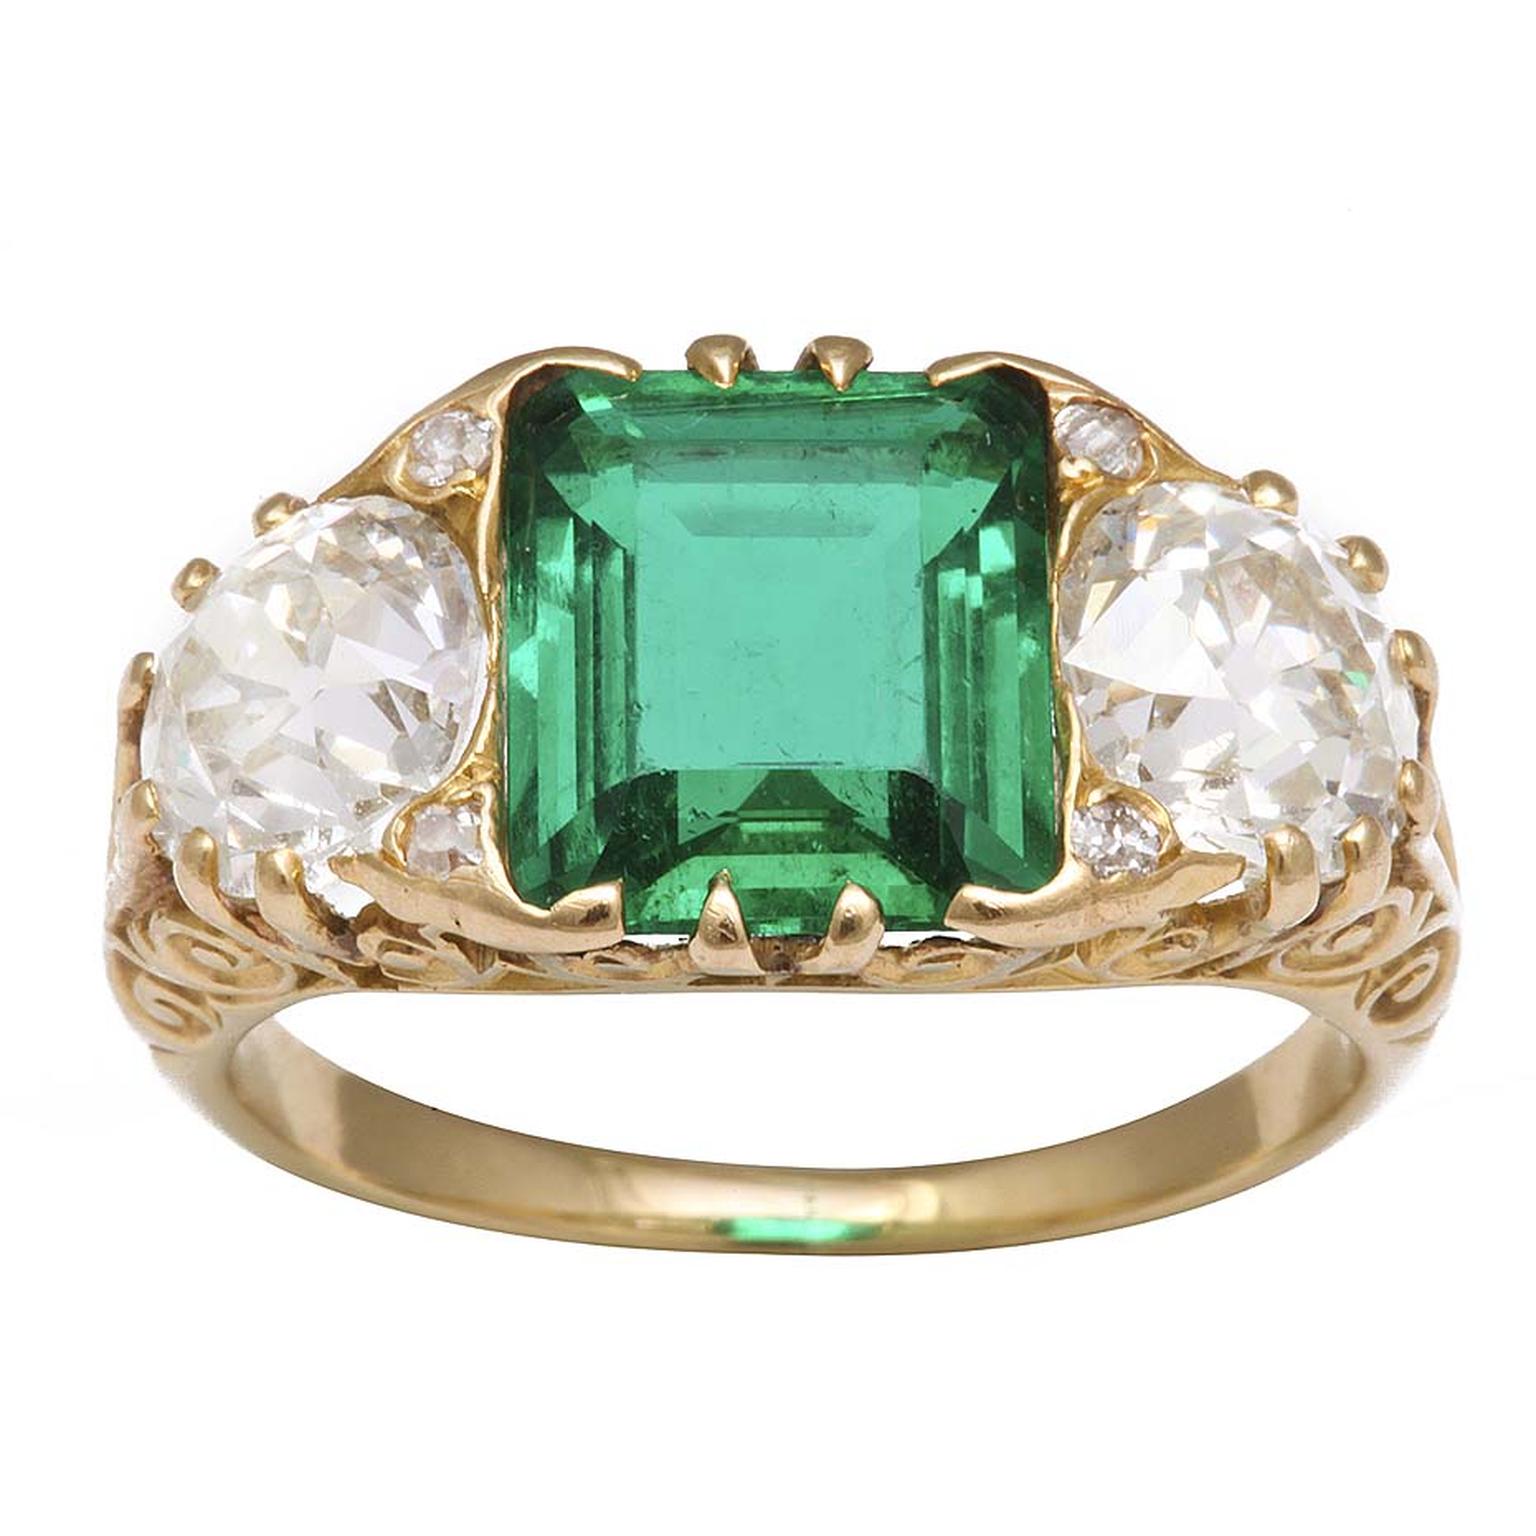 A La Vieille Russie Victorian engagement ring in gold with a central-set Colombian emerald flanked by old-mine diamonds.